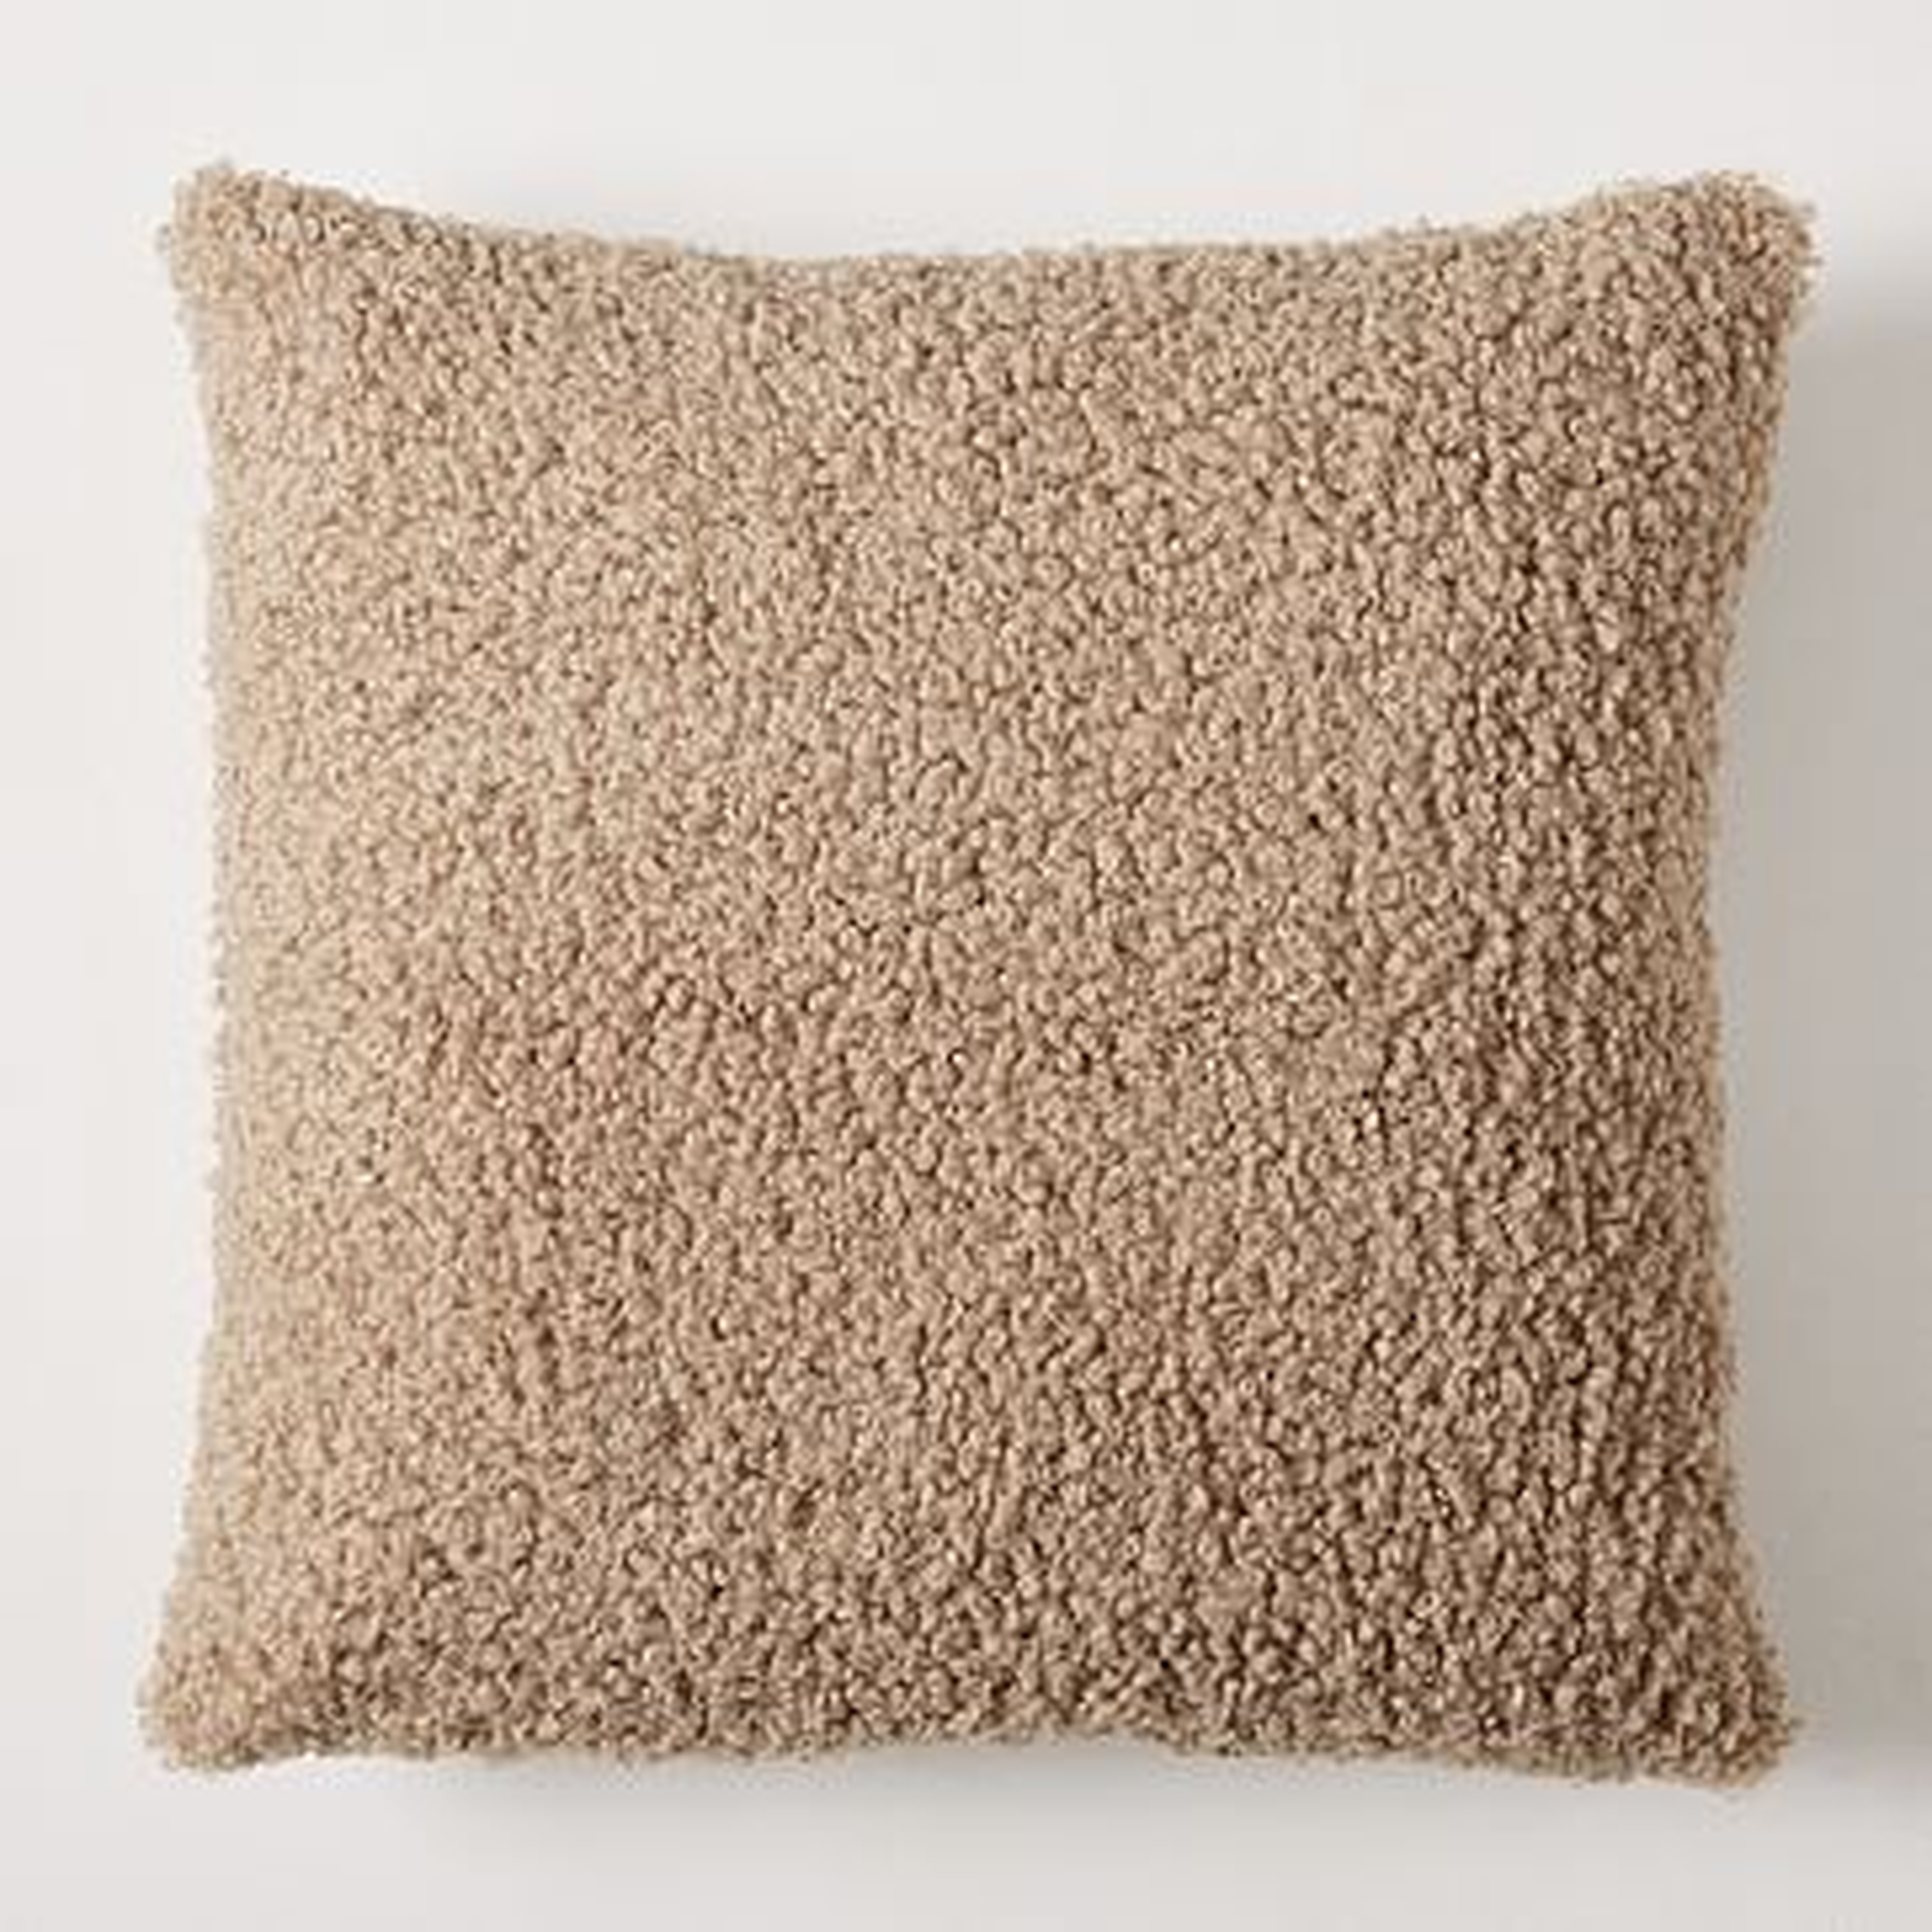 Faux Shearling Pillow Cover, 20"x20", Sable - West Elm